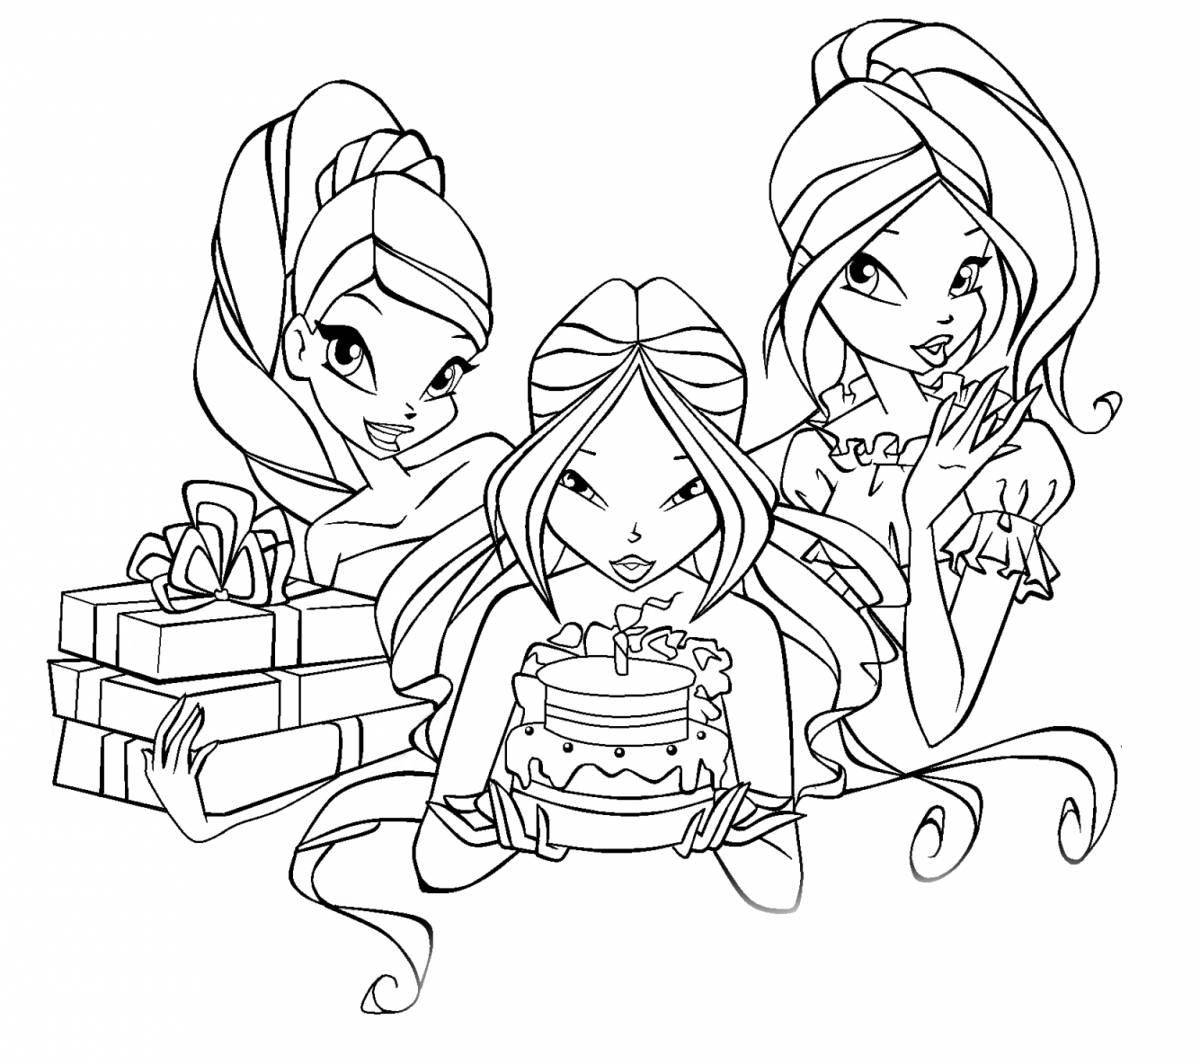 Live coloring for girls 7-8 years old